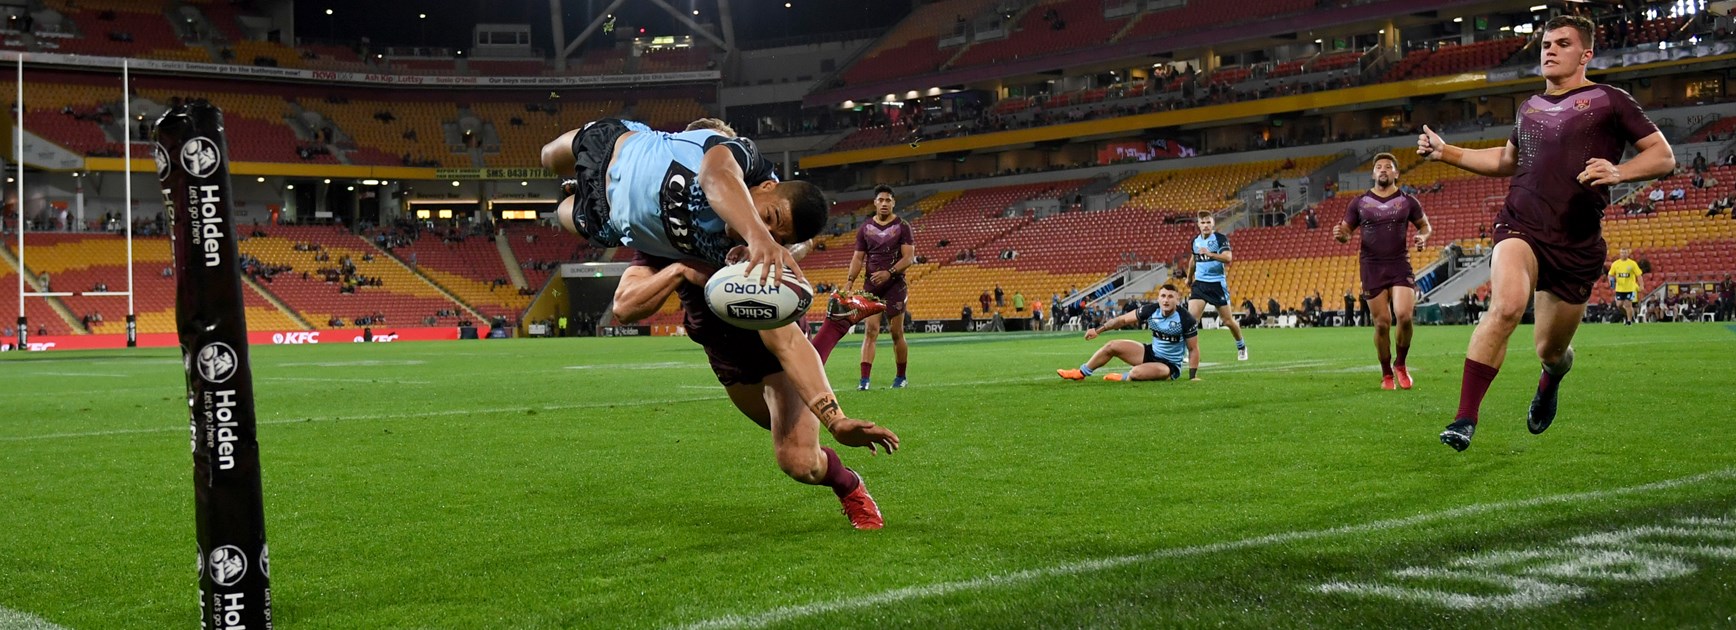 Maroons under 20s claim historic win over Blues